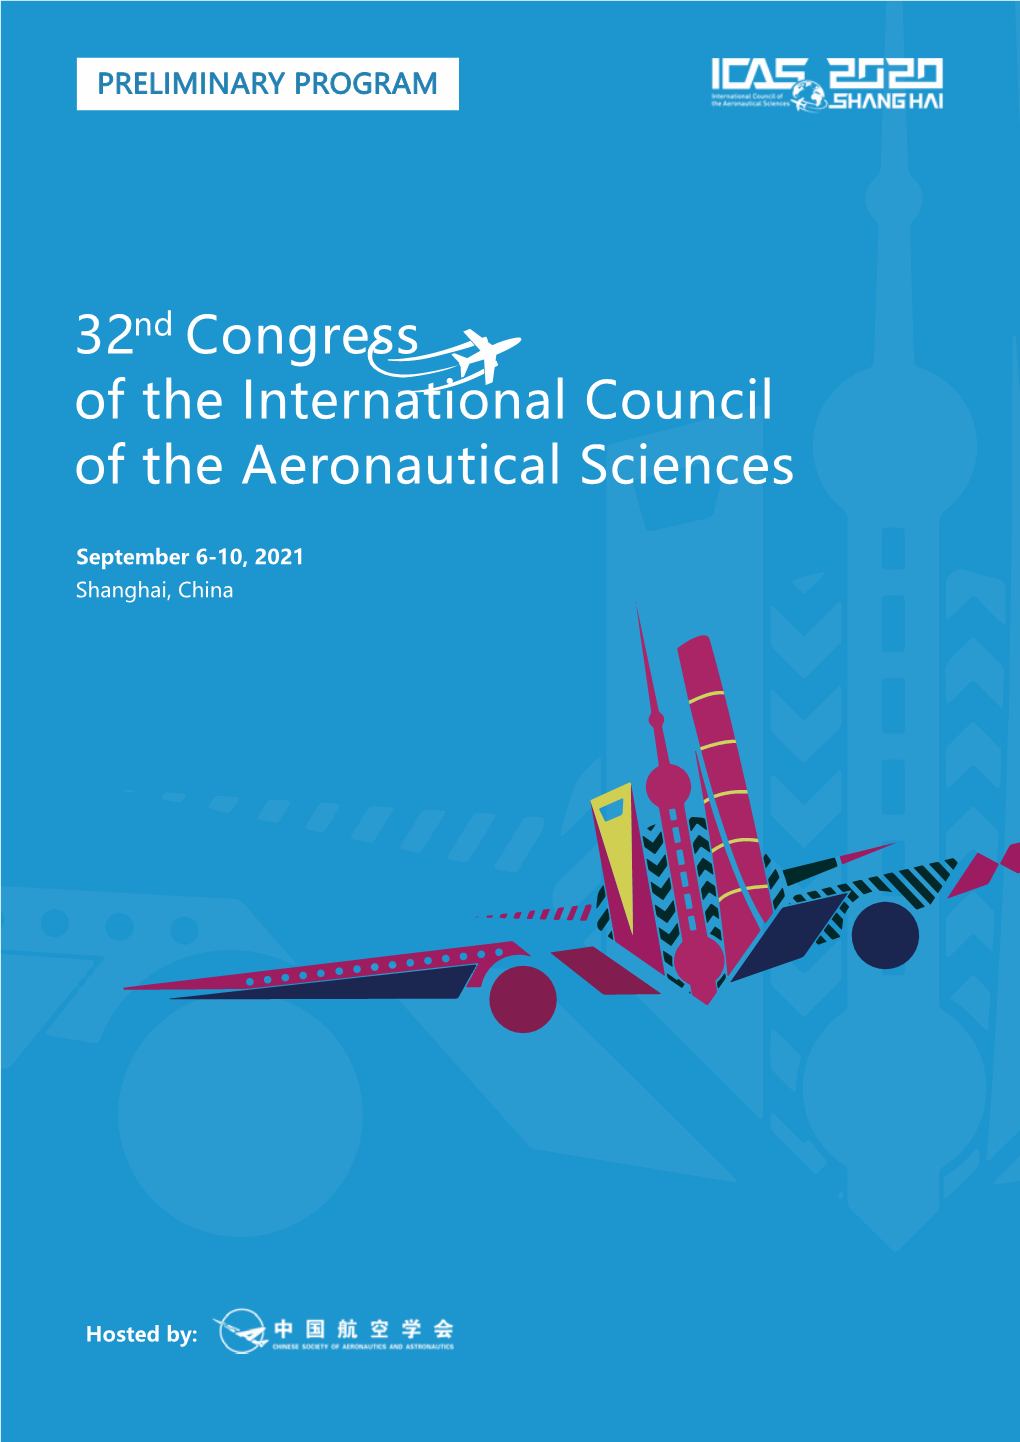 32 Congress of the International Council of the Aeronautical Sciences